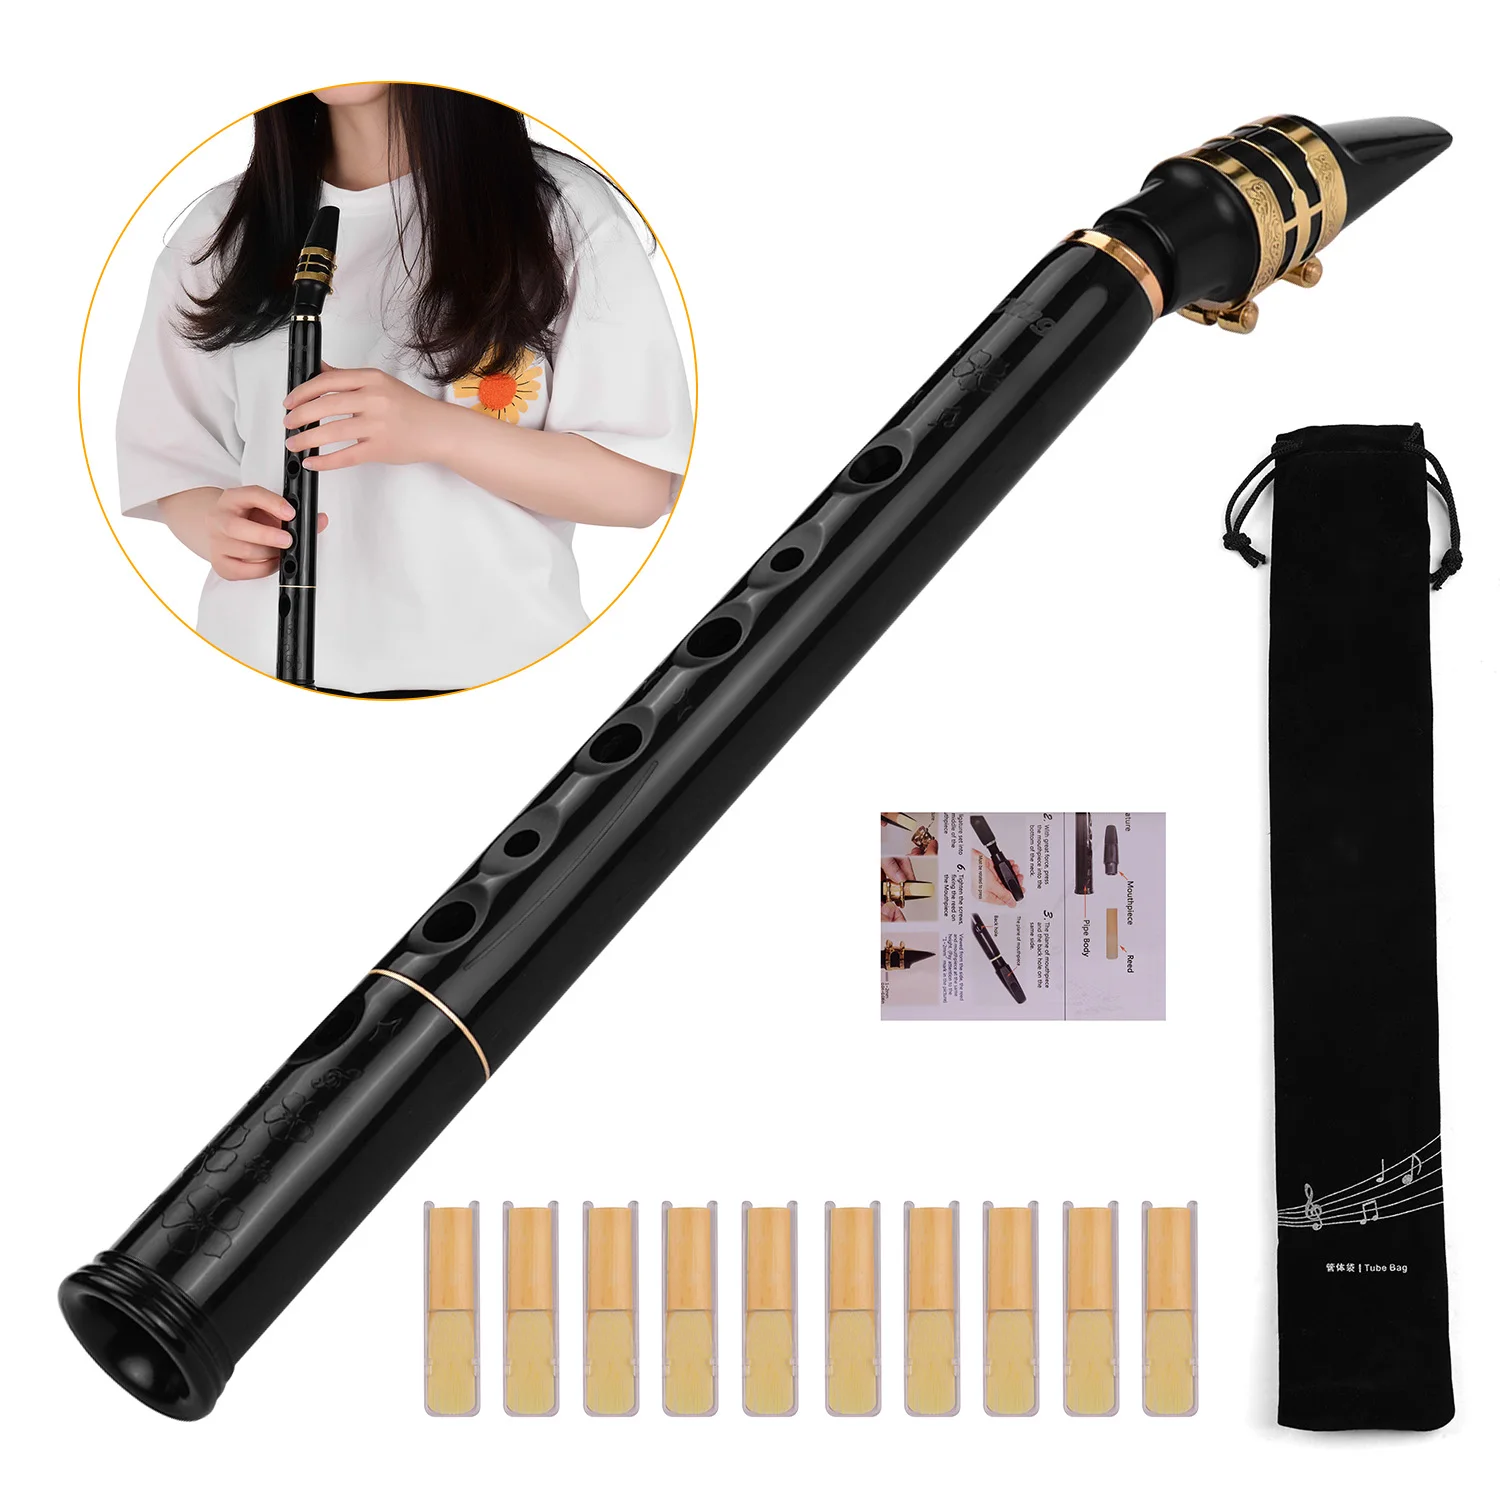 H715538fb75b745c3a1048752a669a7c9b HiXing C Key Mini Pocket Saxophone Sax ABS Material with Mouthpieces 10pcs Reeds Carrying Bag ammoon ​Bb Sax Woodwind Instrument